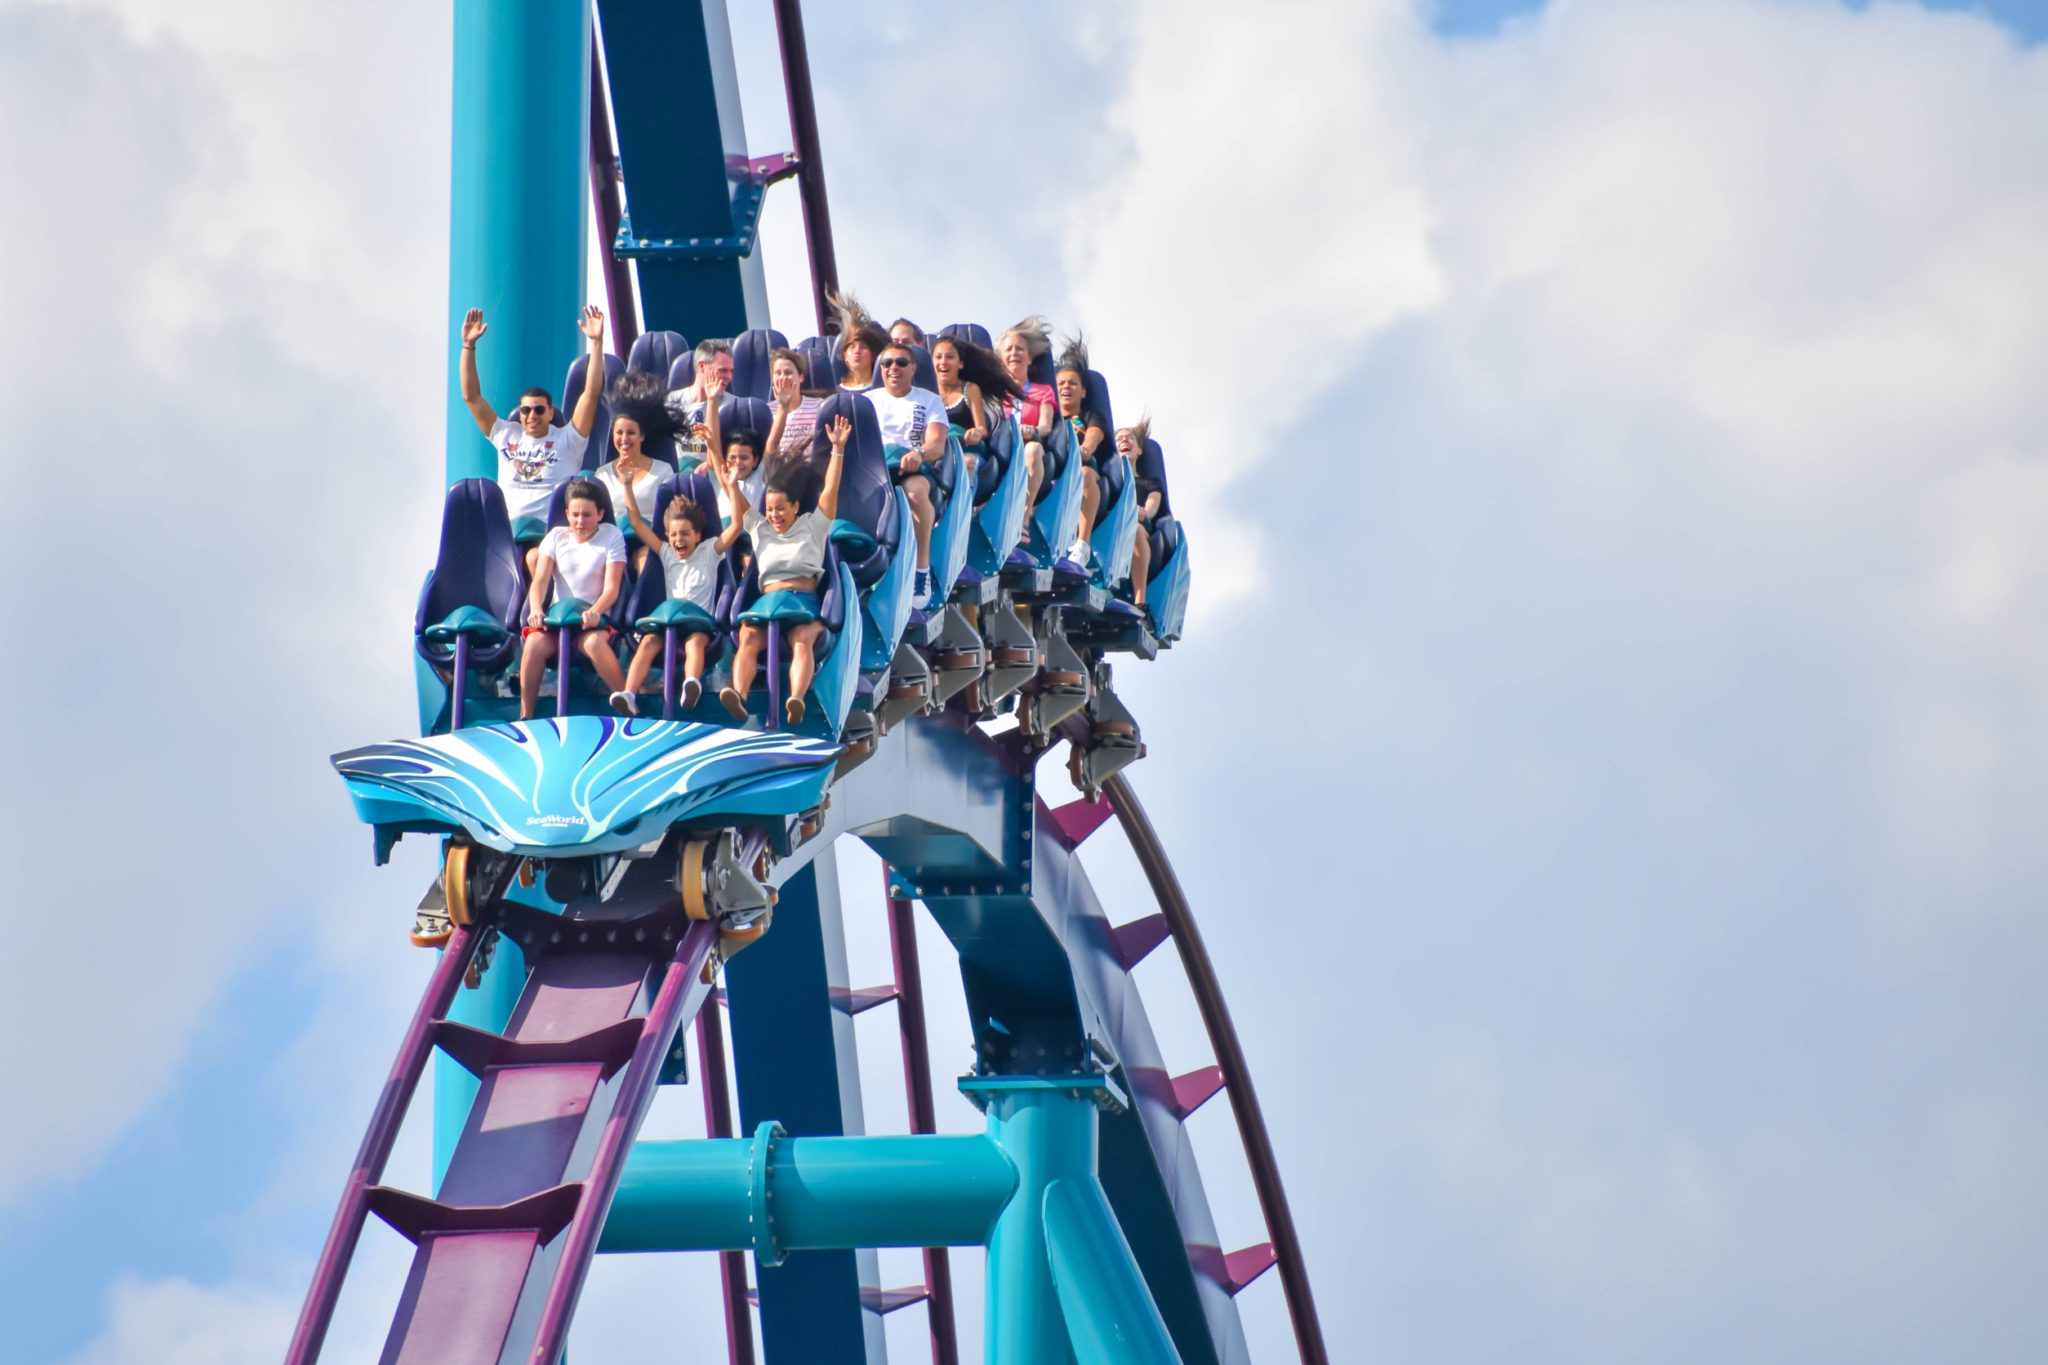 Amusement Park Premises Liability and How to Stay Cool